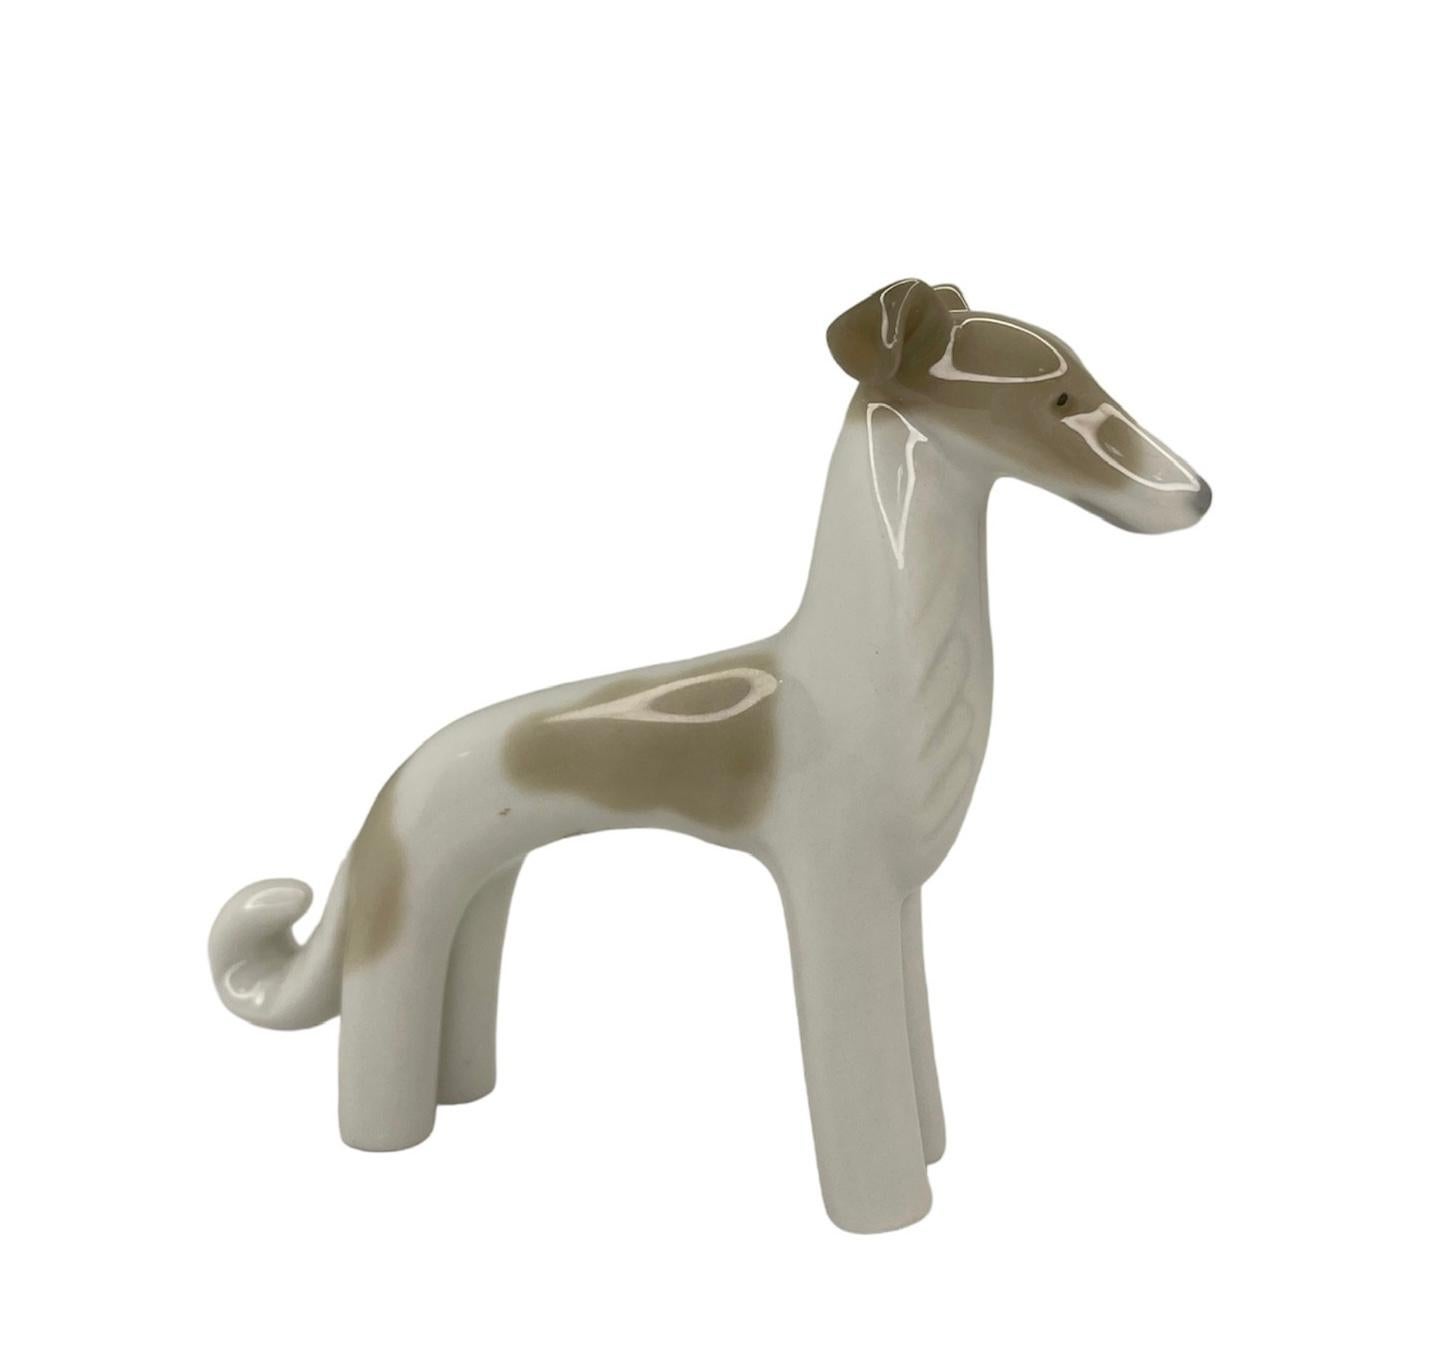 This is a Lladro porcelain mini figurine of a dog. It depicts a hand painted brown and white dog standing up and very contemplative. The Lladro Nao hallmark is below the figurine.